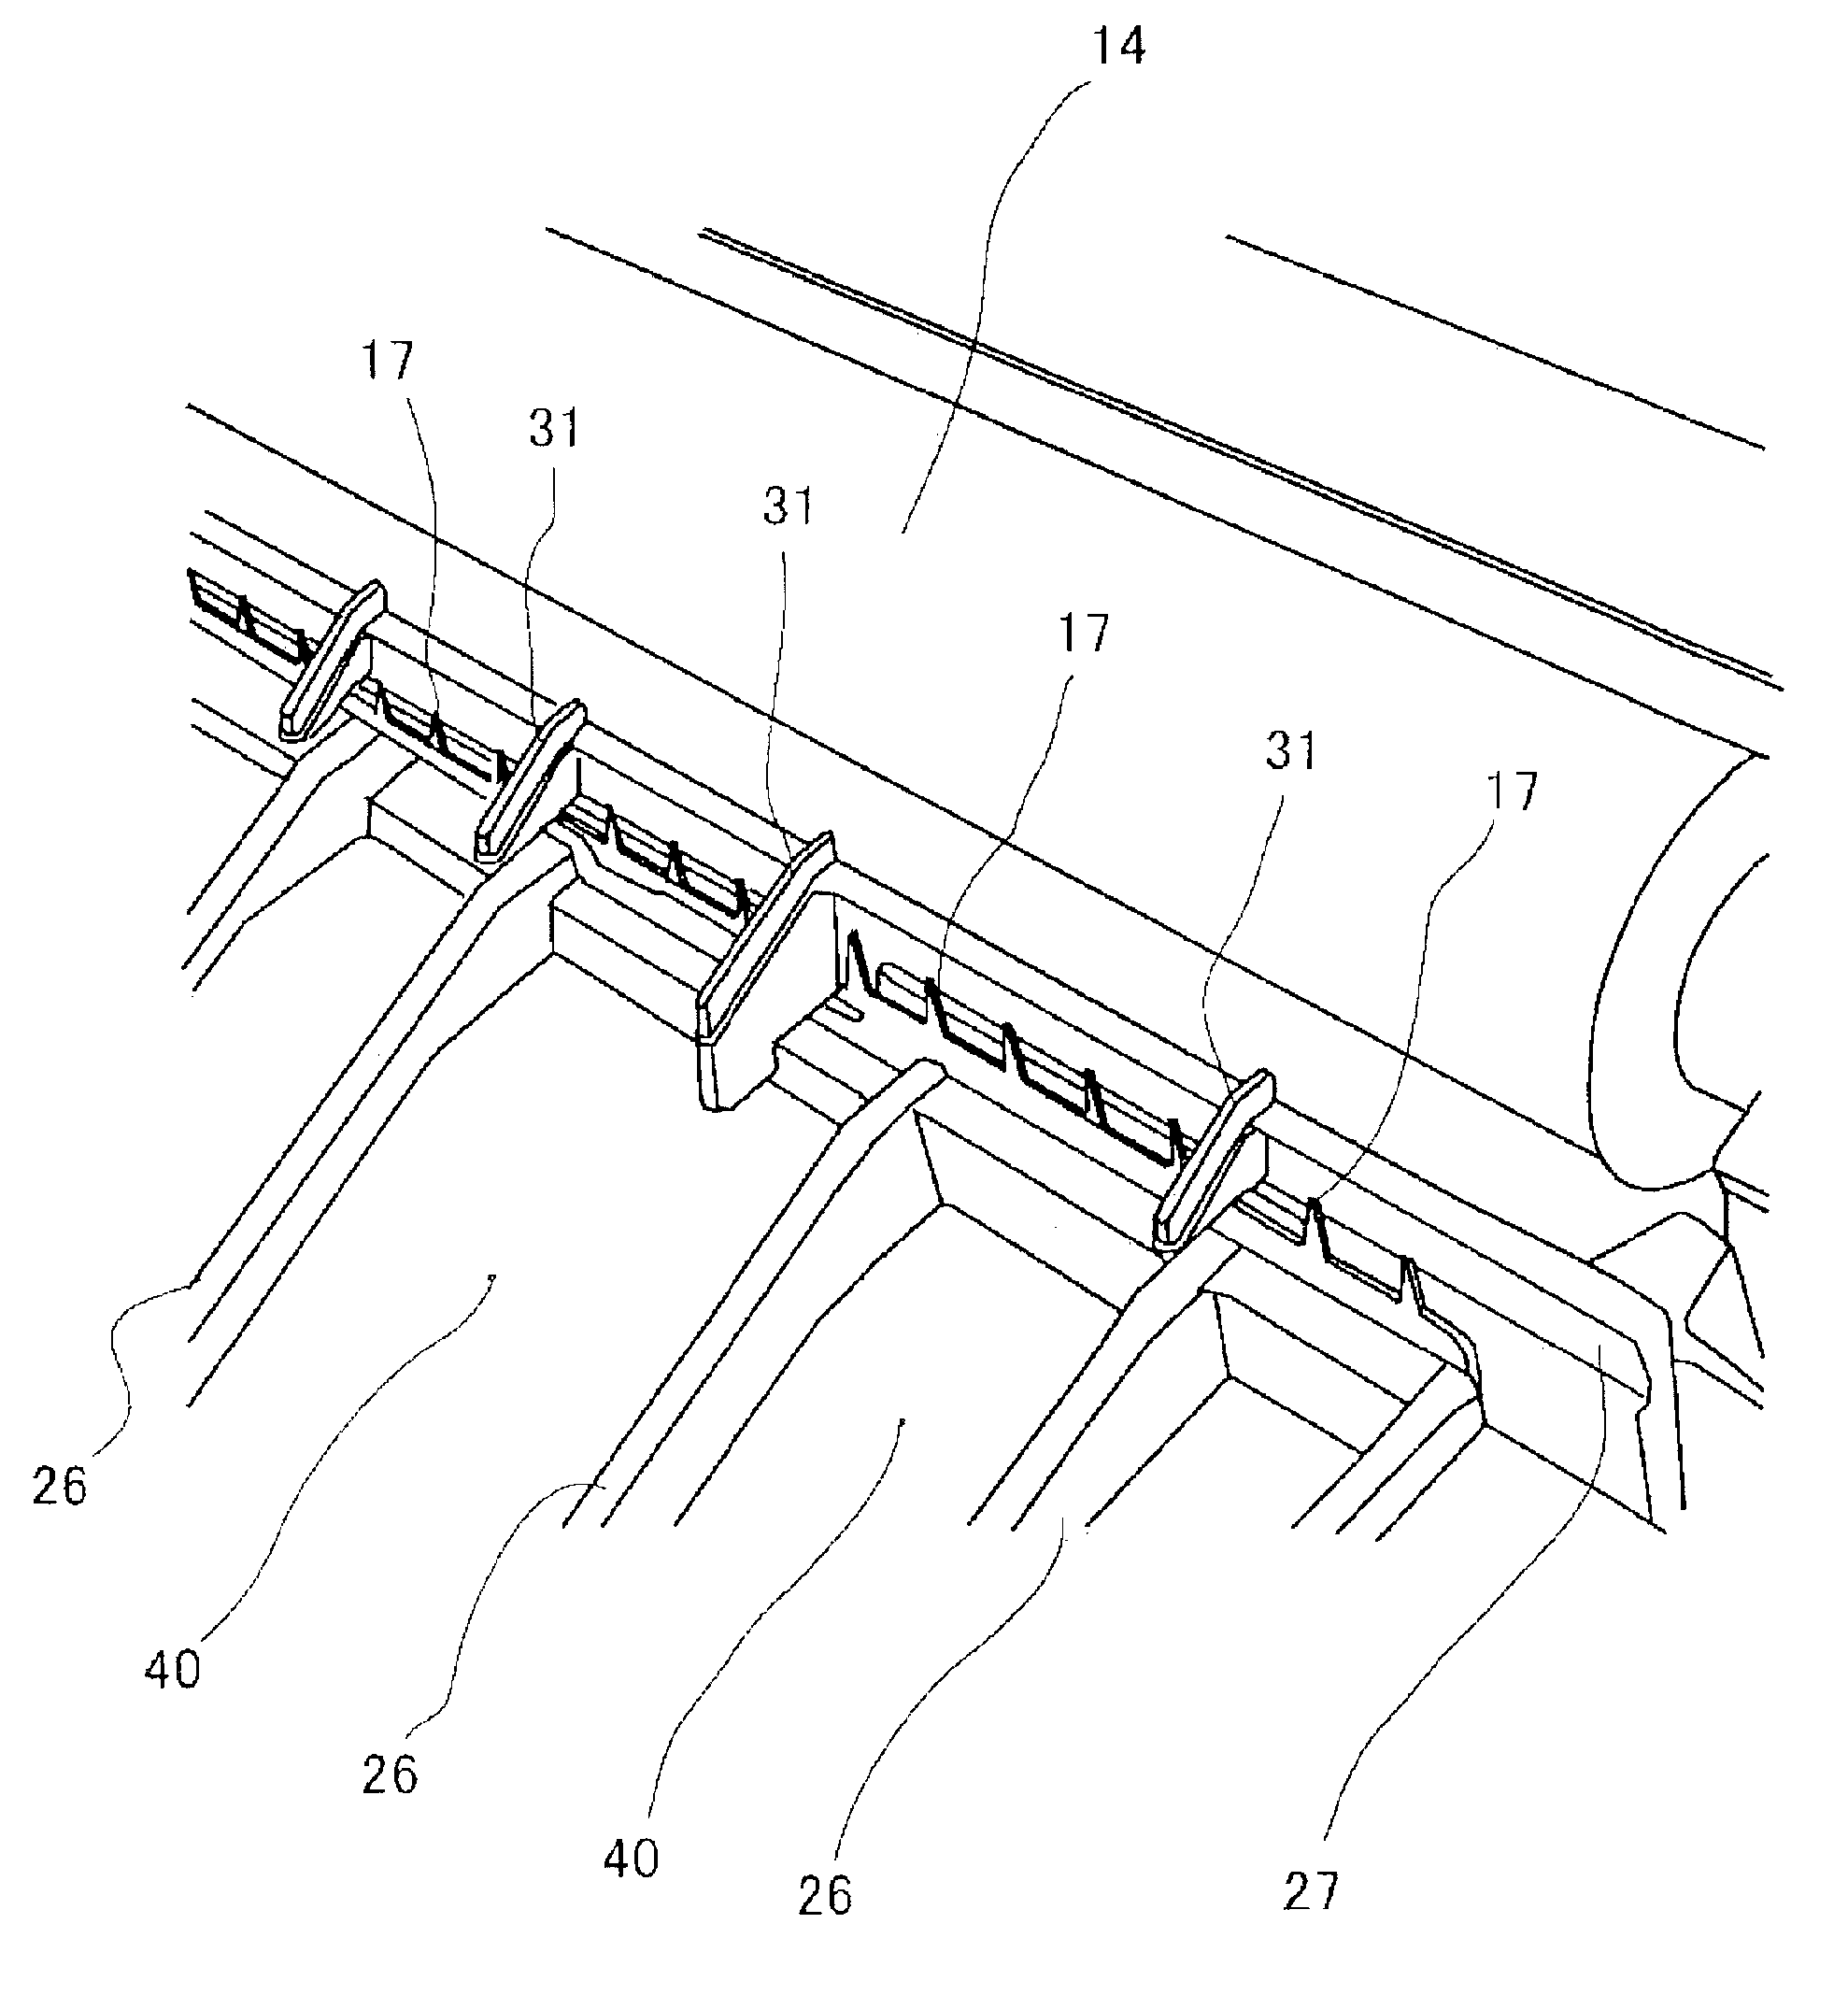 Image forming device having a conductive member with separation needles